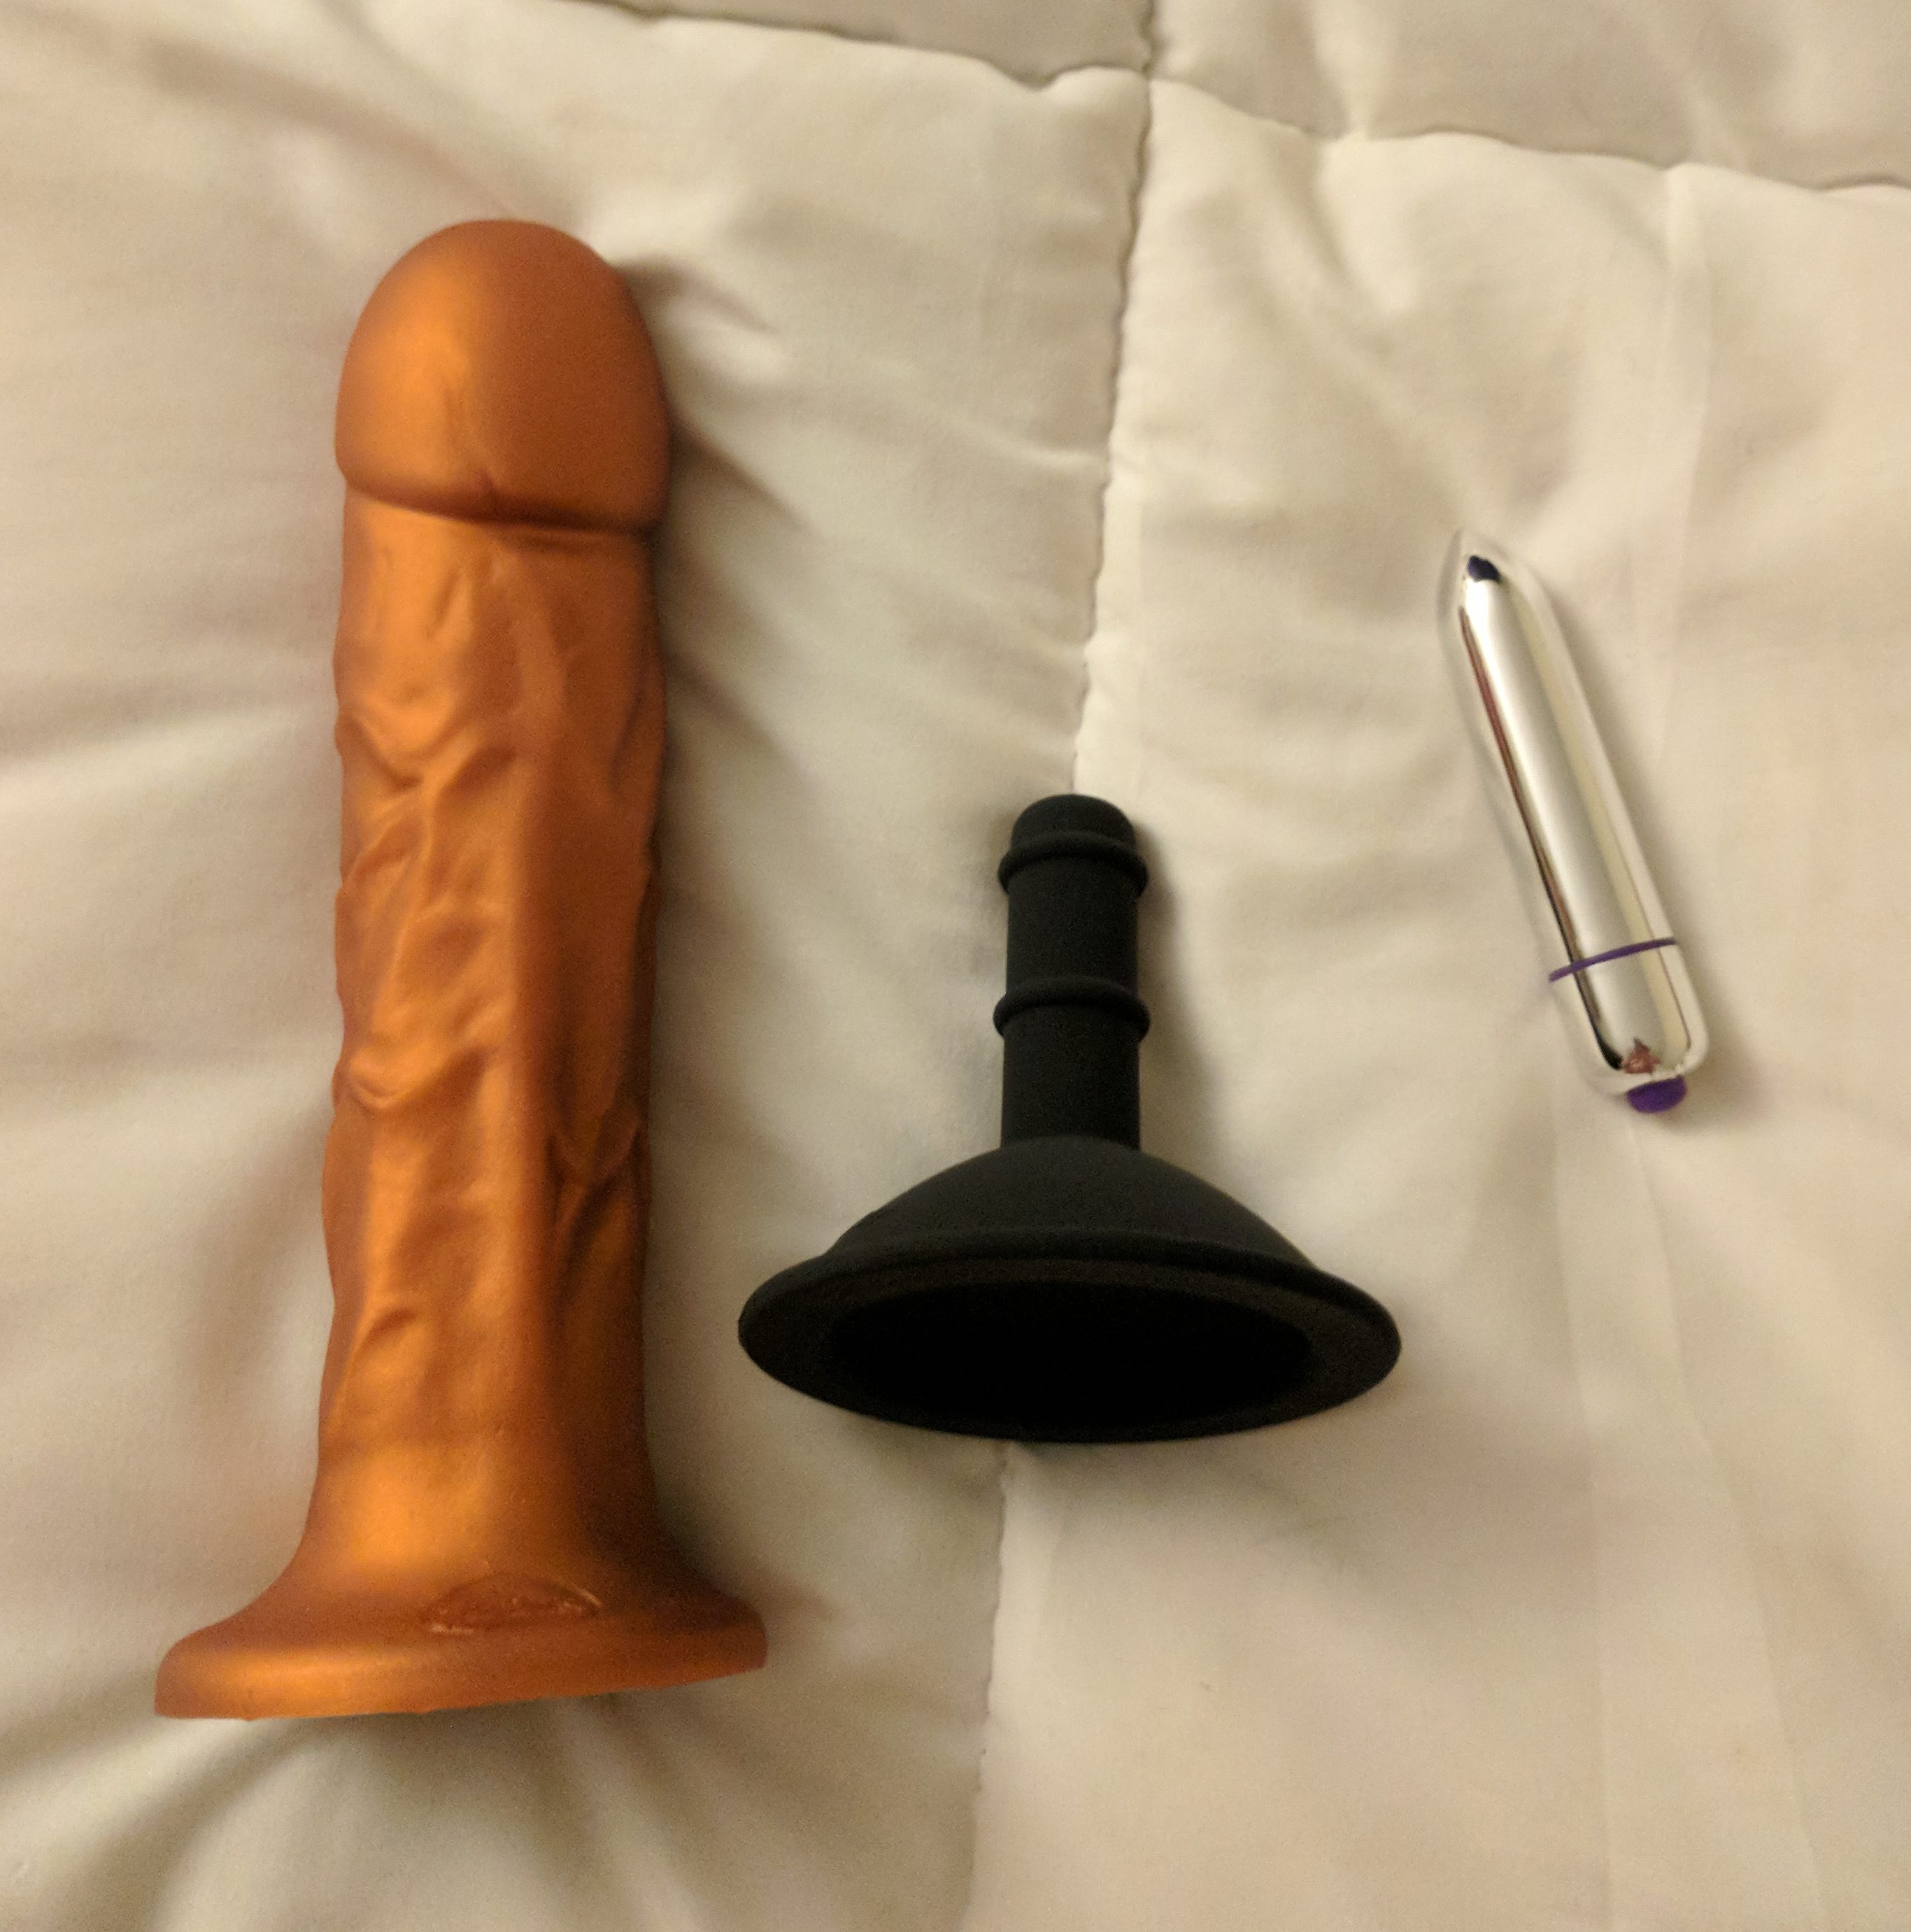 Tantus Goliath Super Soft with accessories out of box